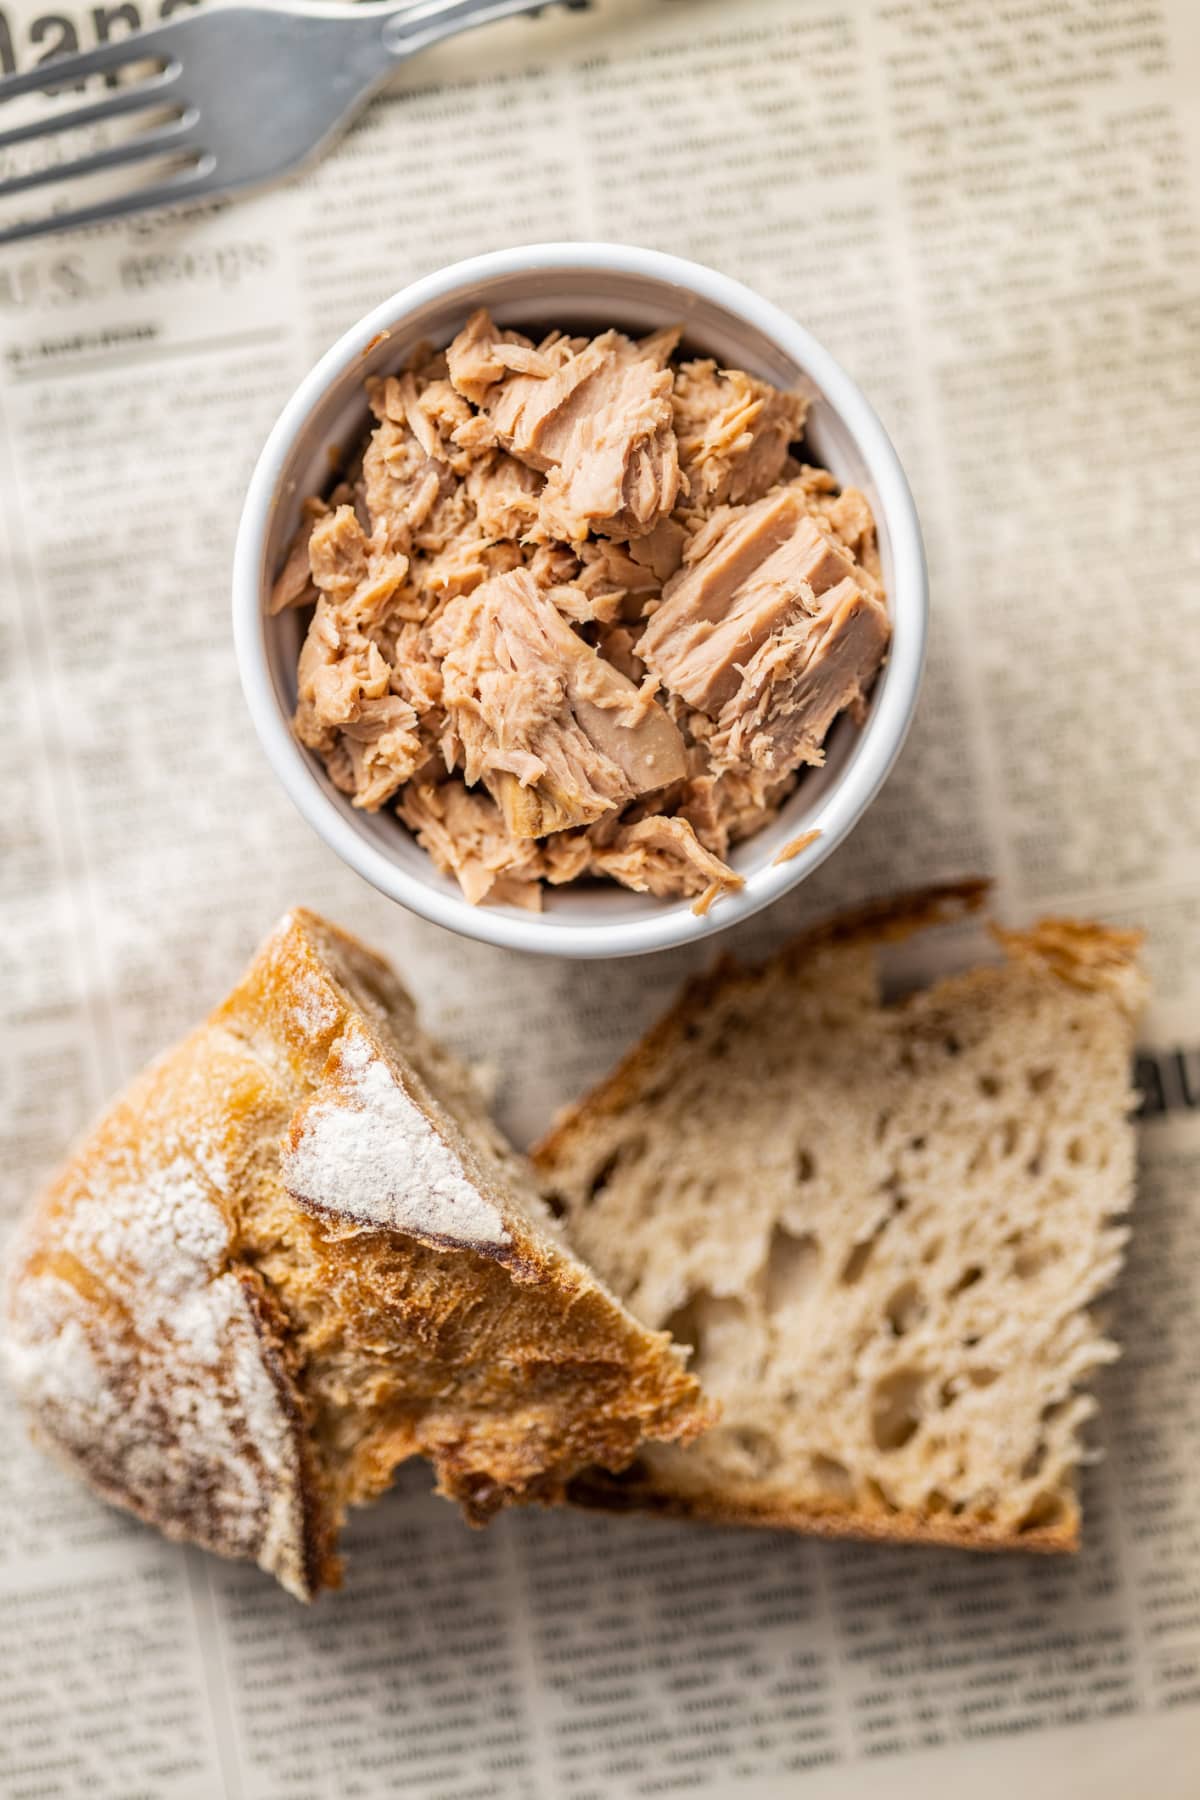 Canned tuna fish in a bowl with bread